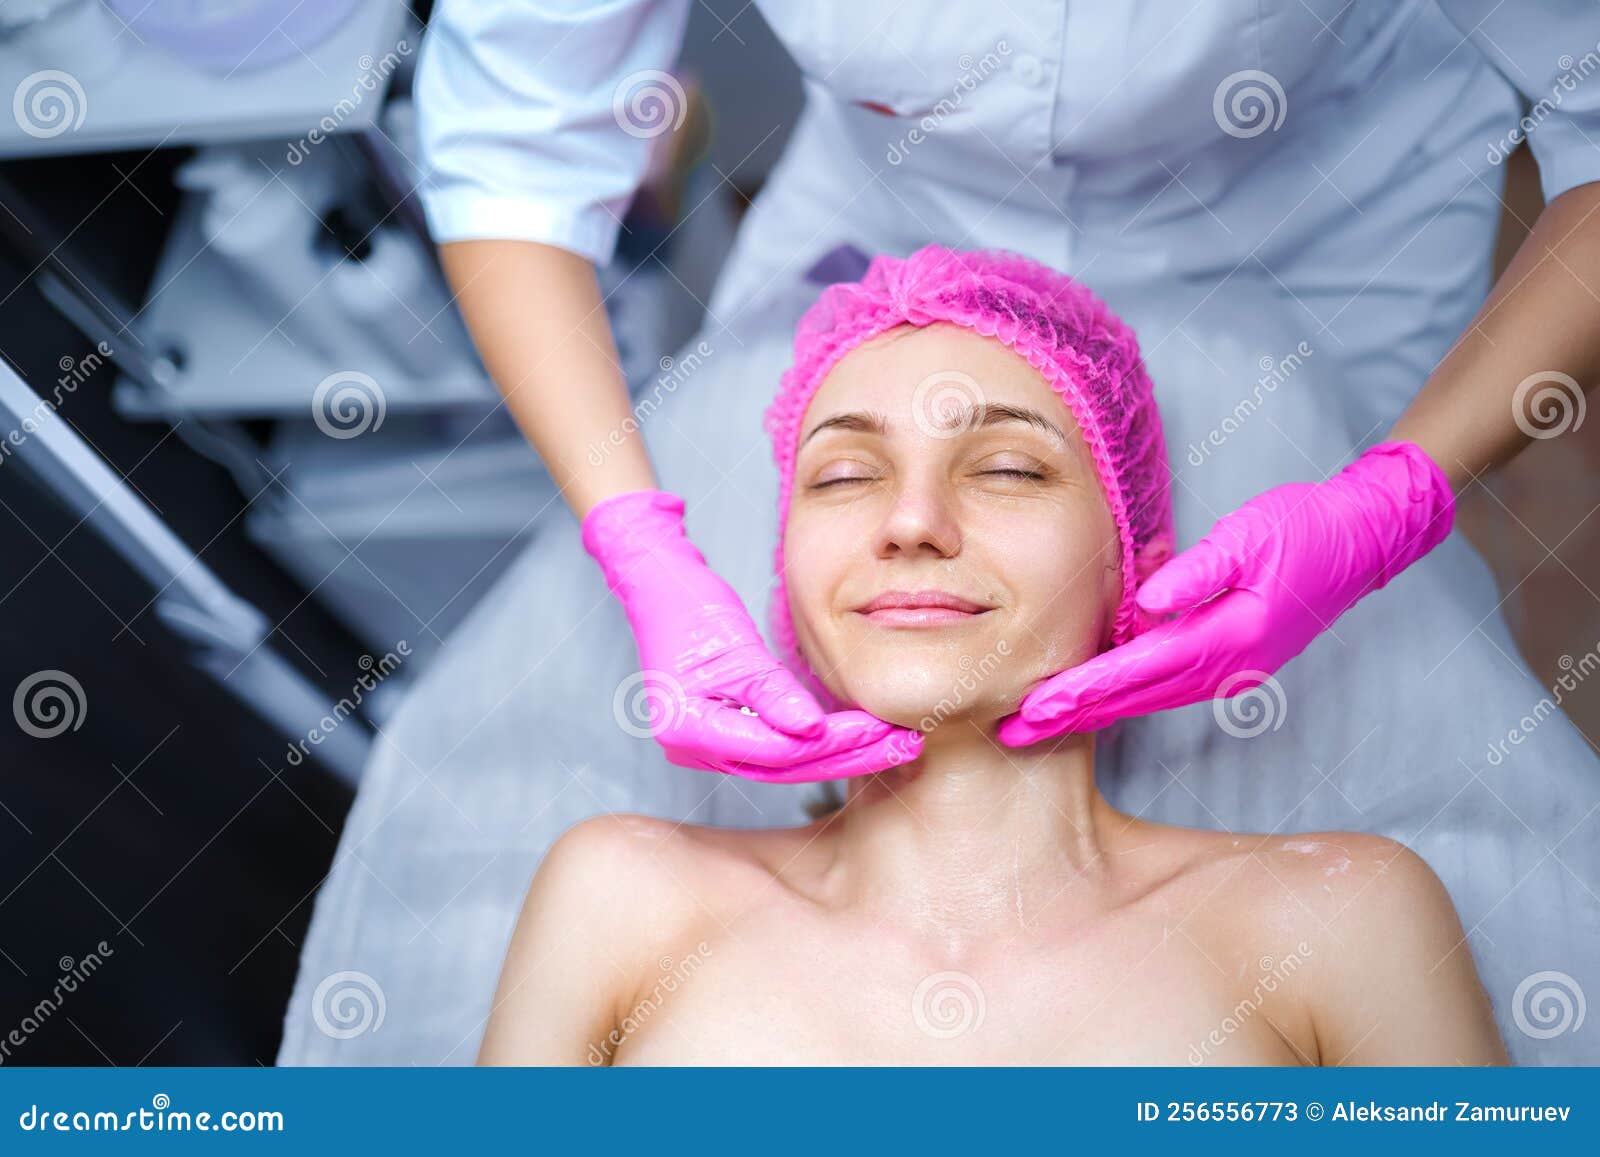 Attractive Female At Spa Health Club Getting A Facial Massage Beautician Doing Massage Of Face